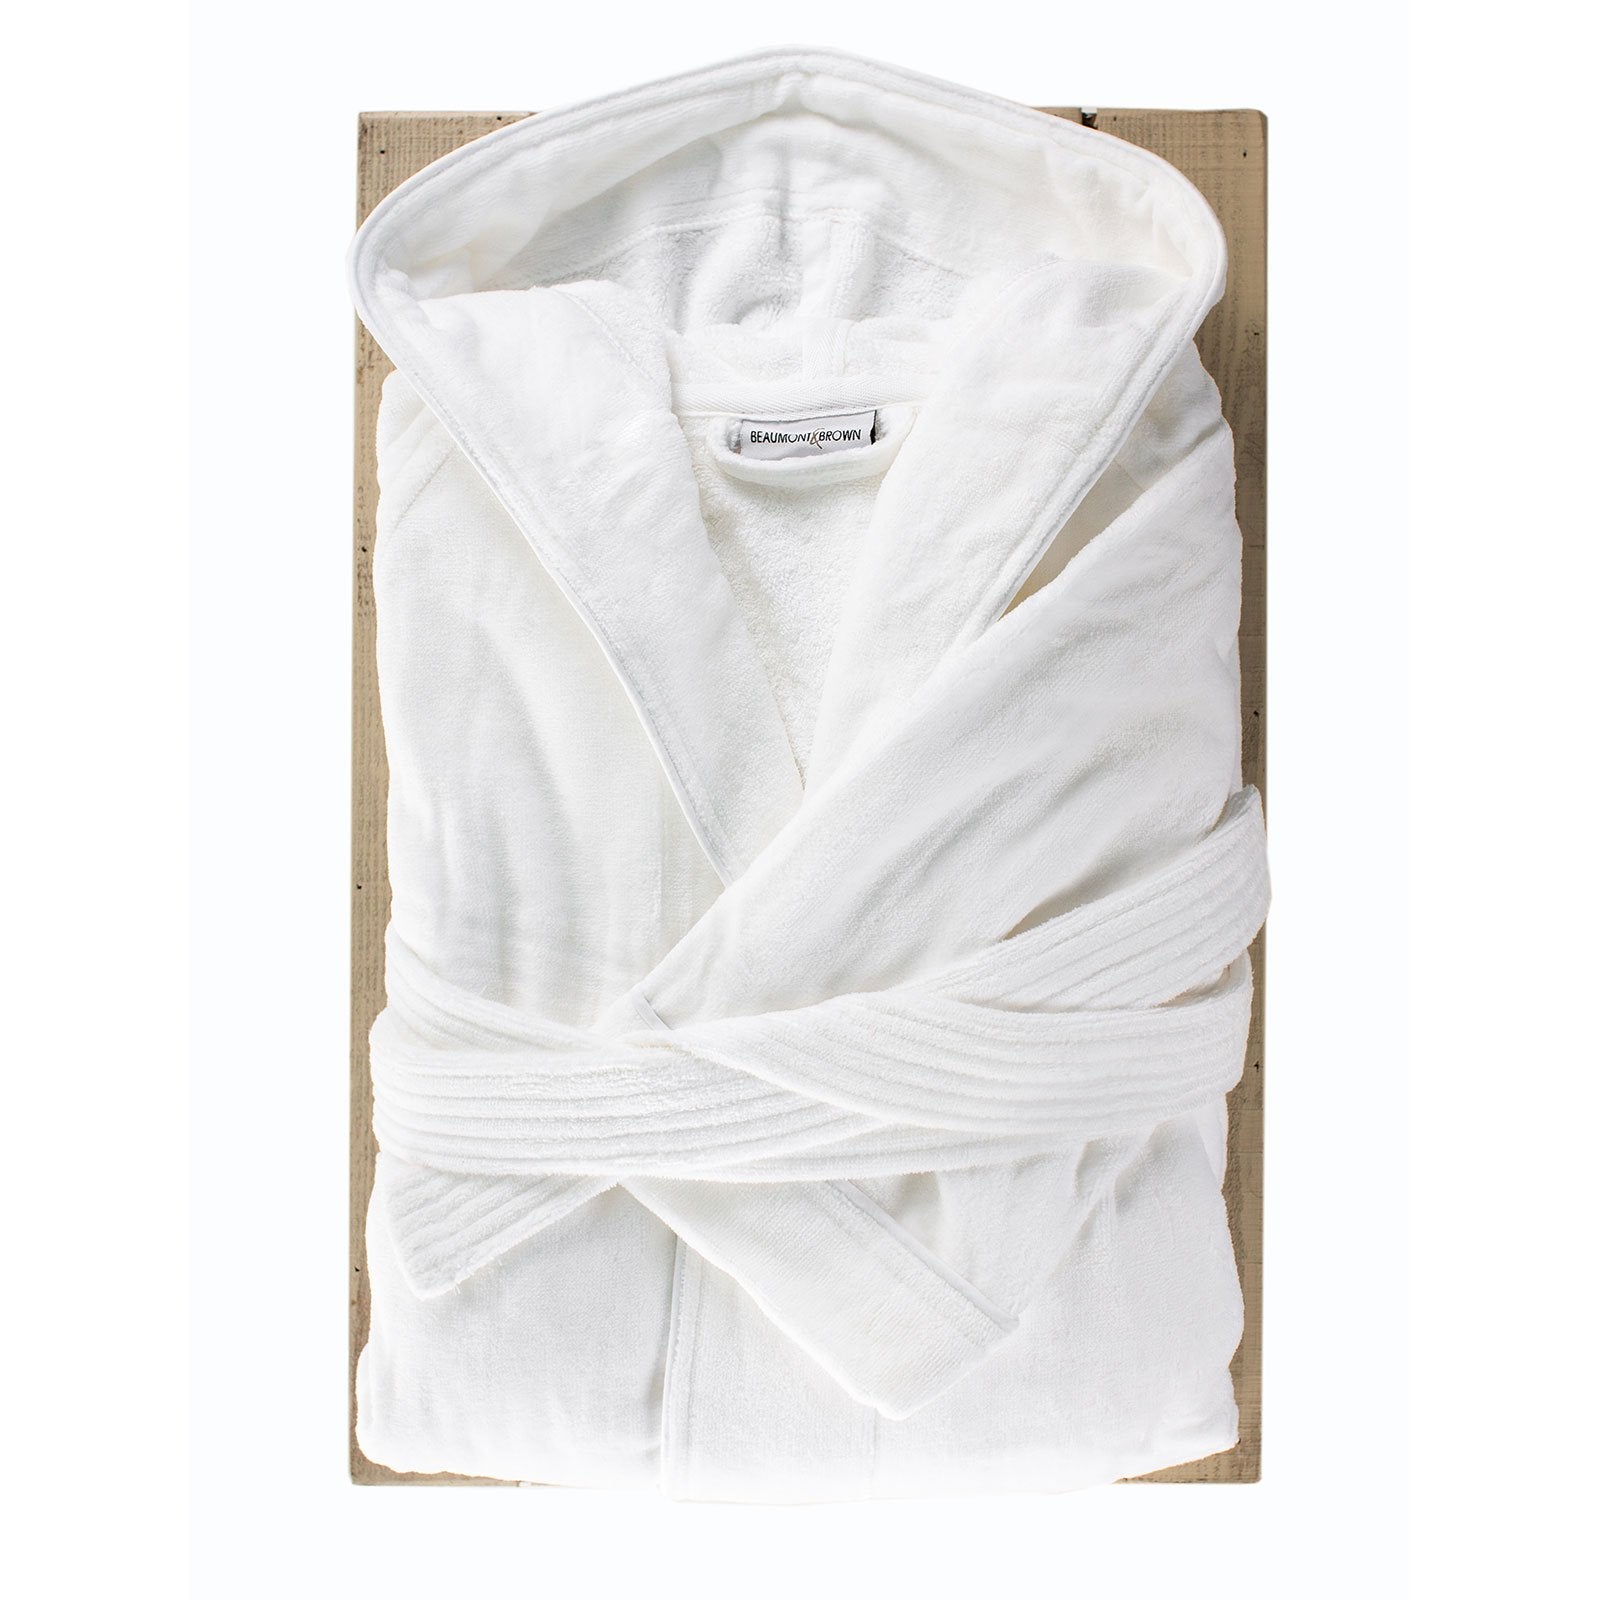 White Hooded Bath Robe from Sleep Naked by Beaumont & Brown